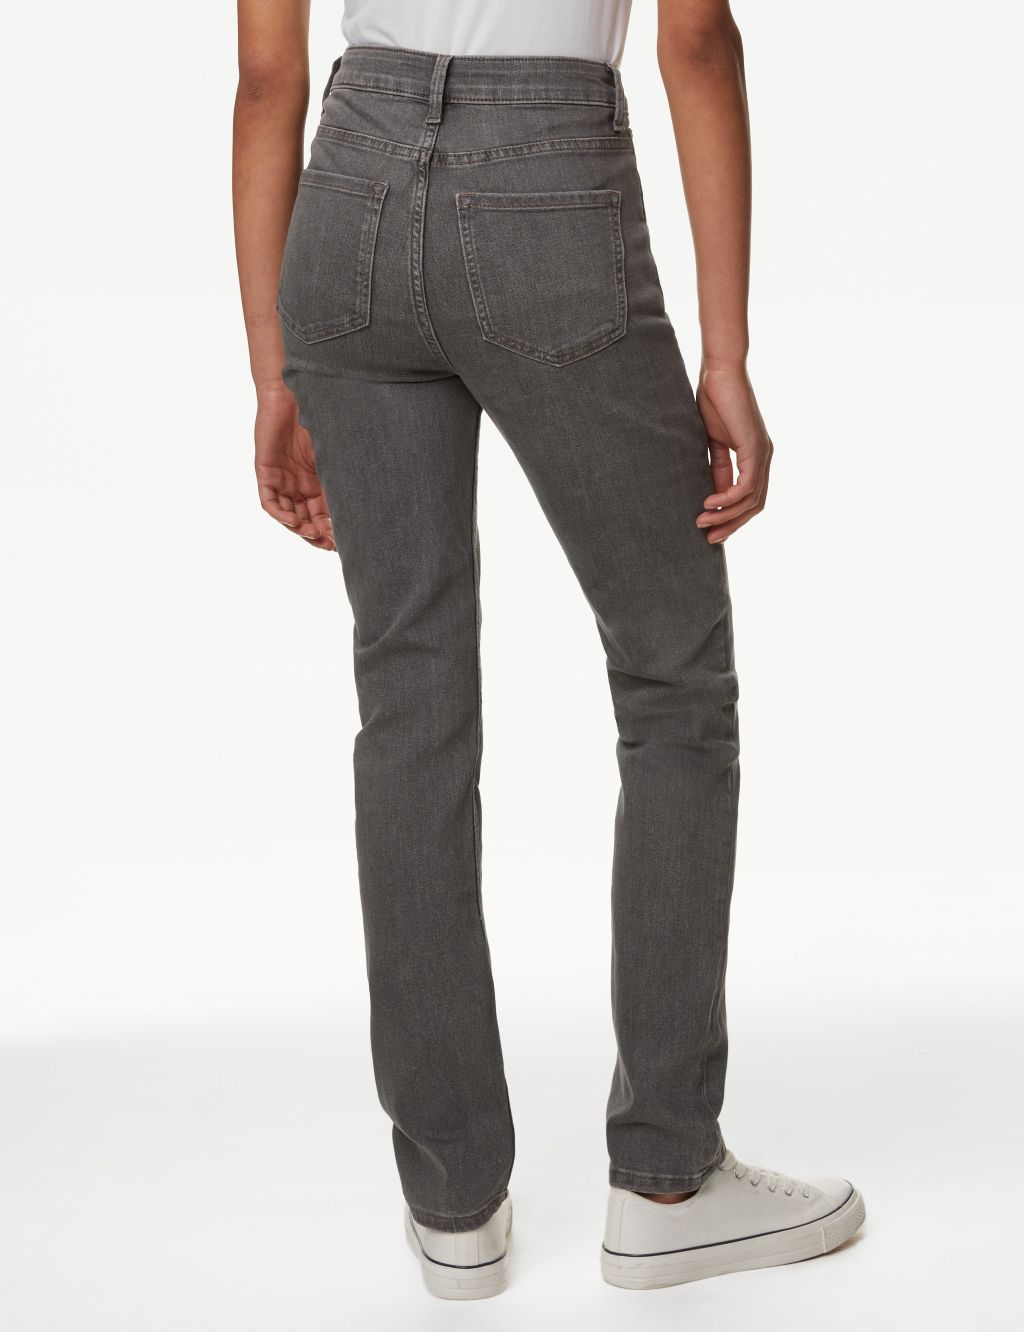 Lily Slim Fit Jeans with Stretch image 5